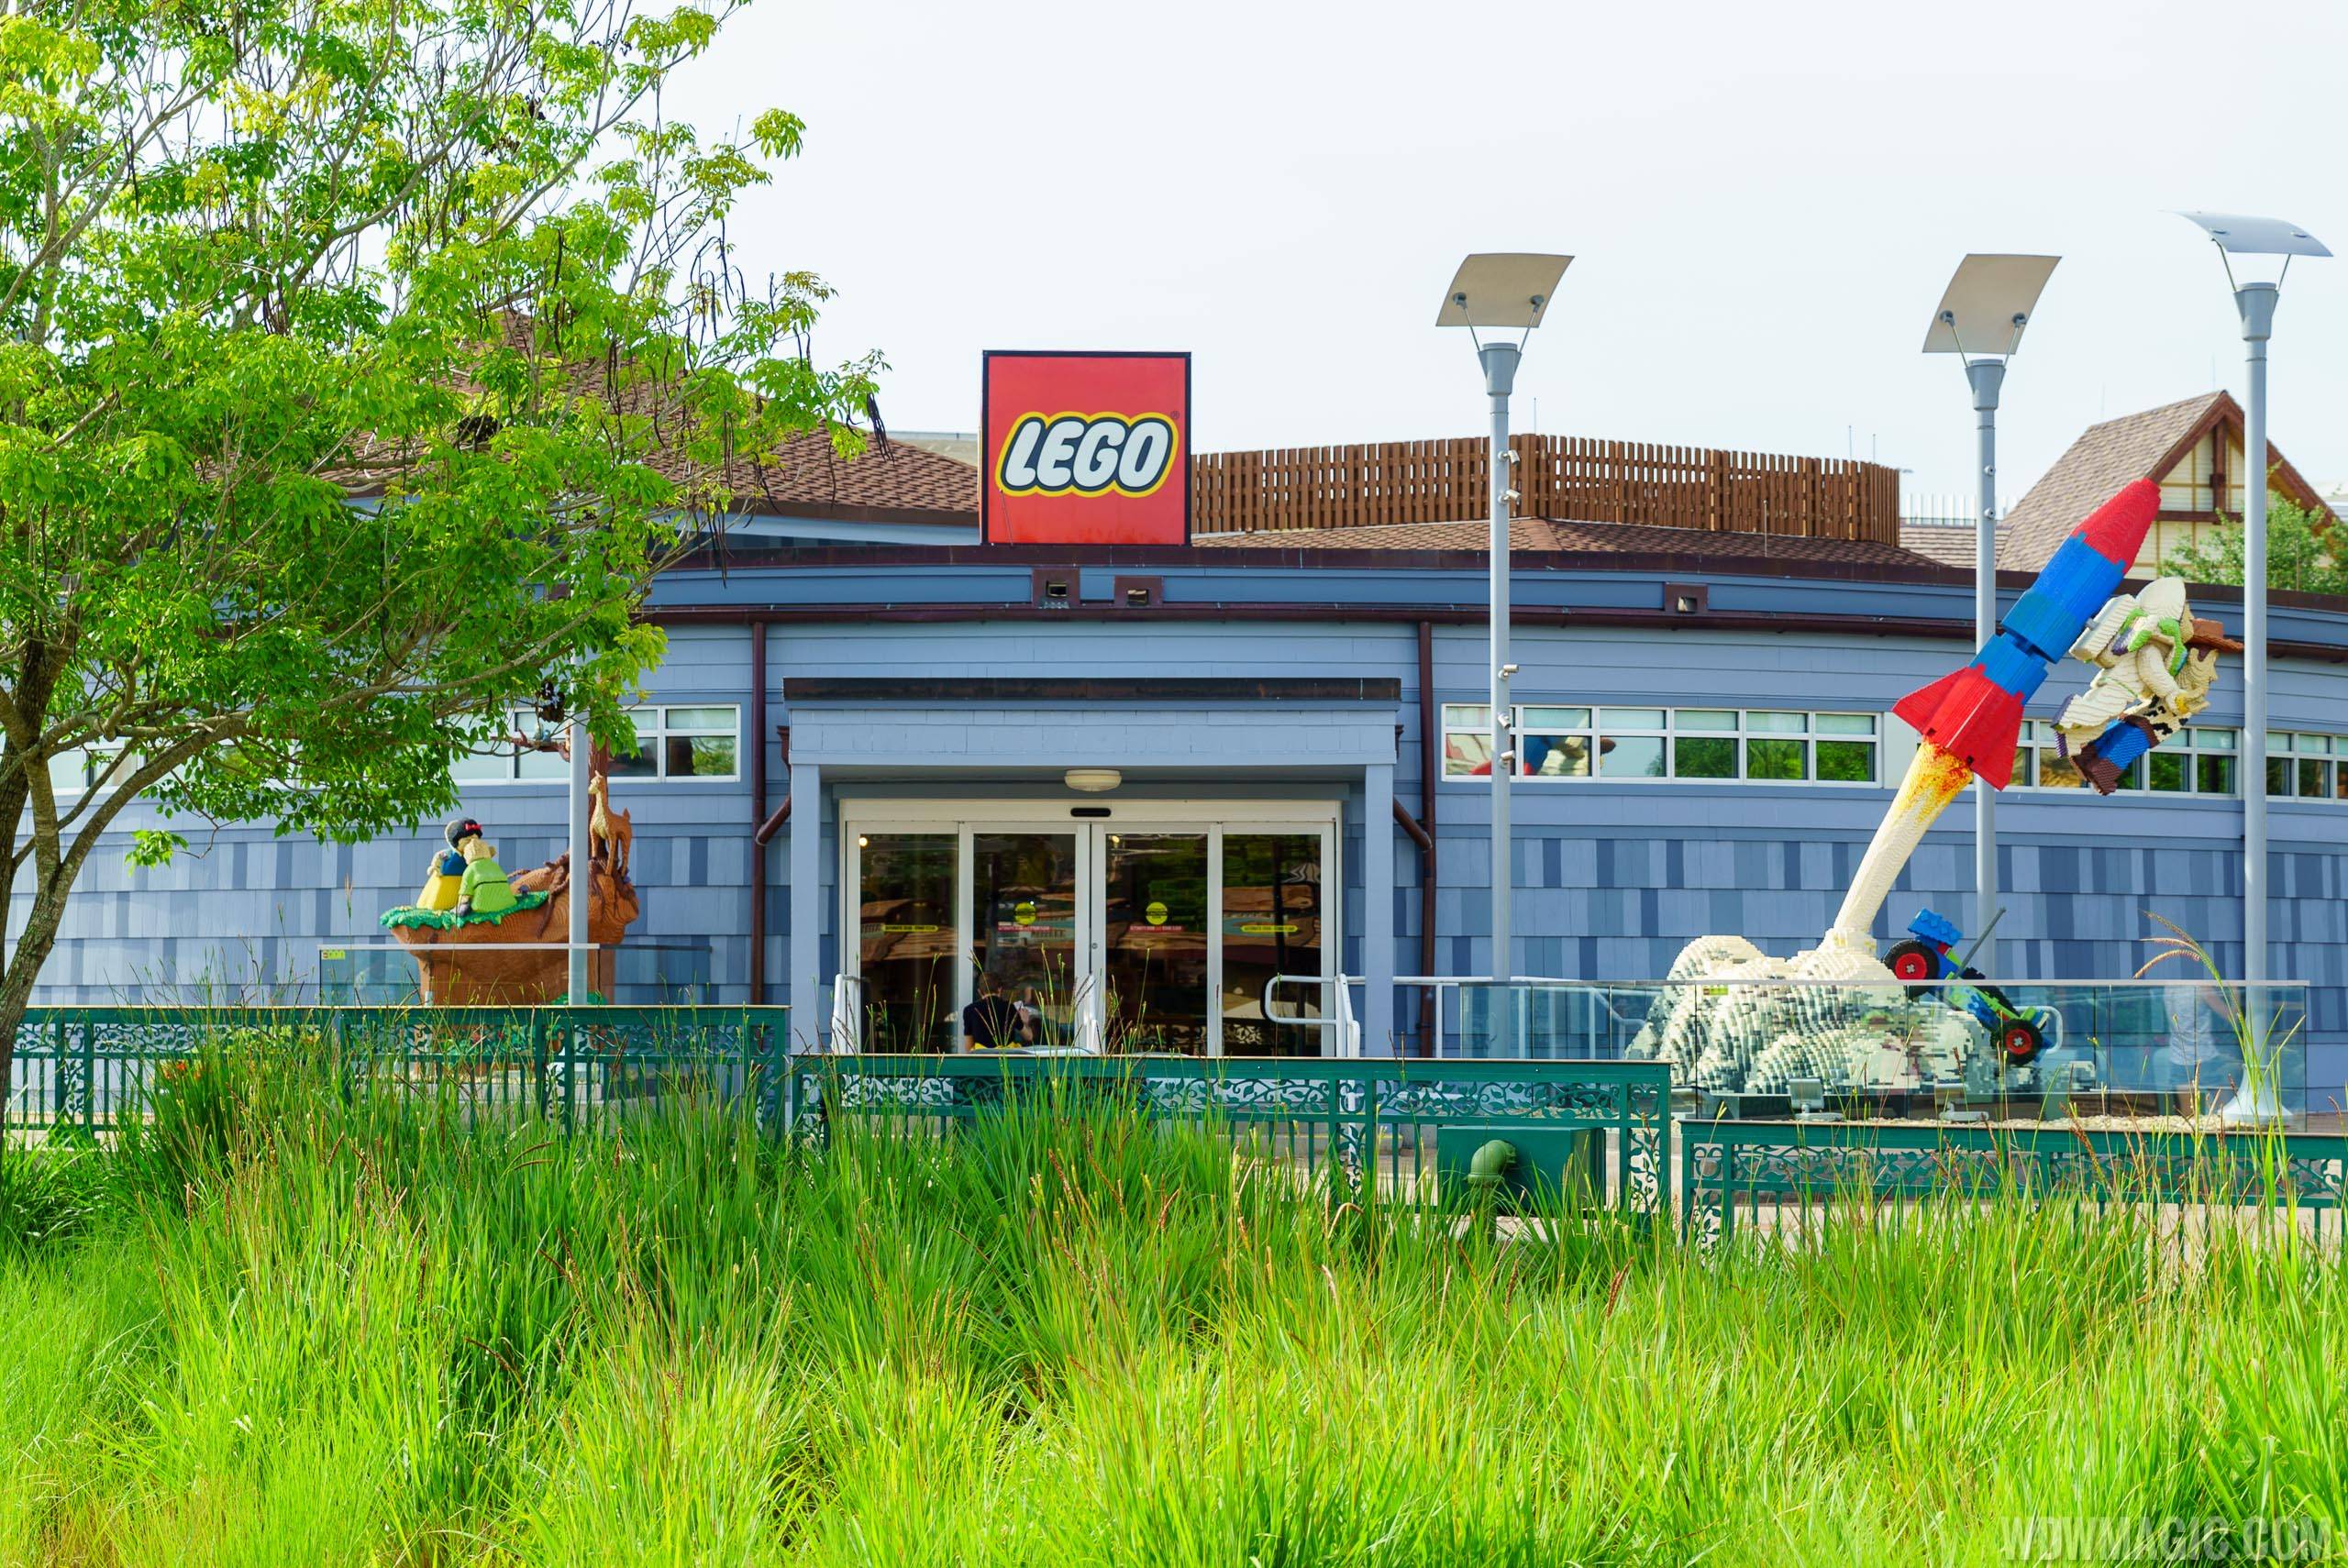 Downtown Disney's Lego Store outdoor play area closing for refurbishment